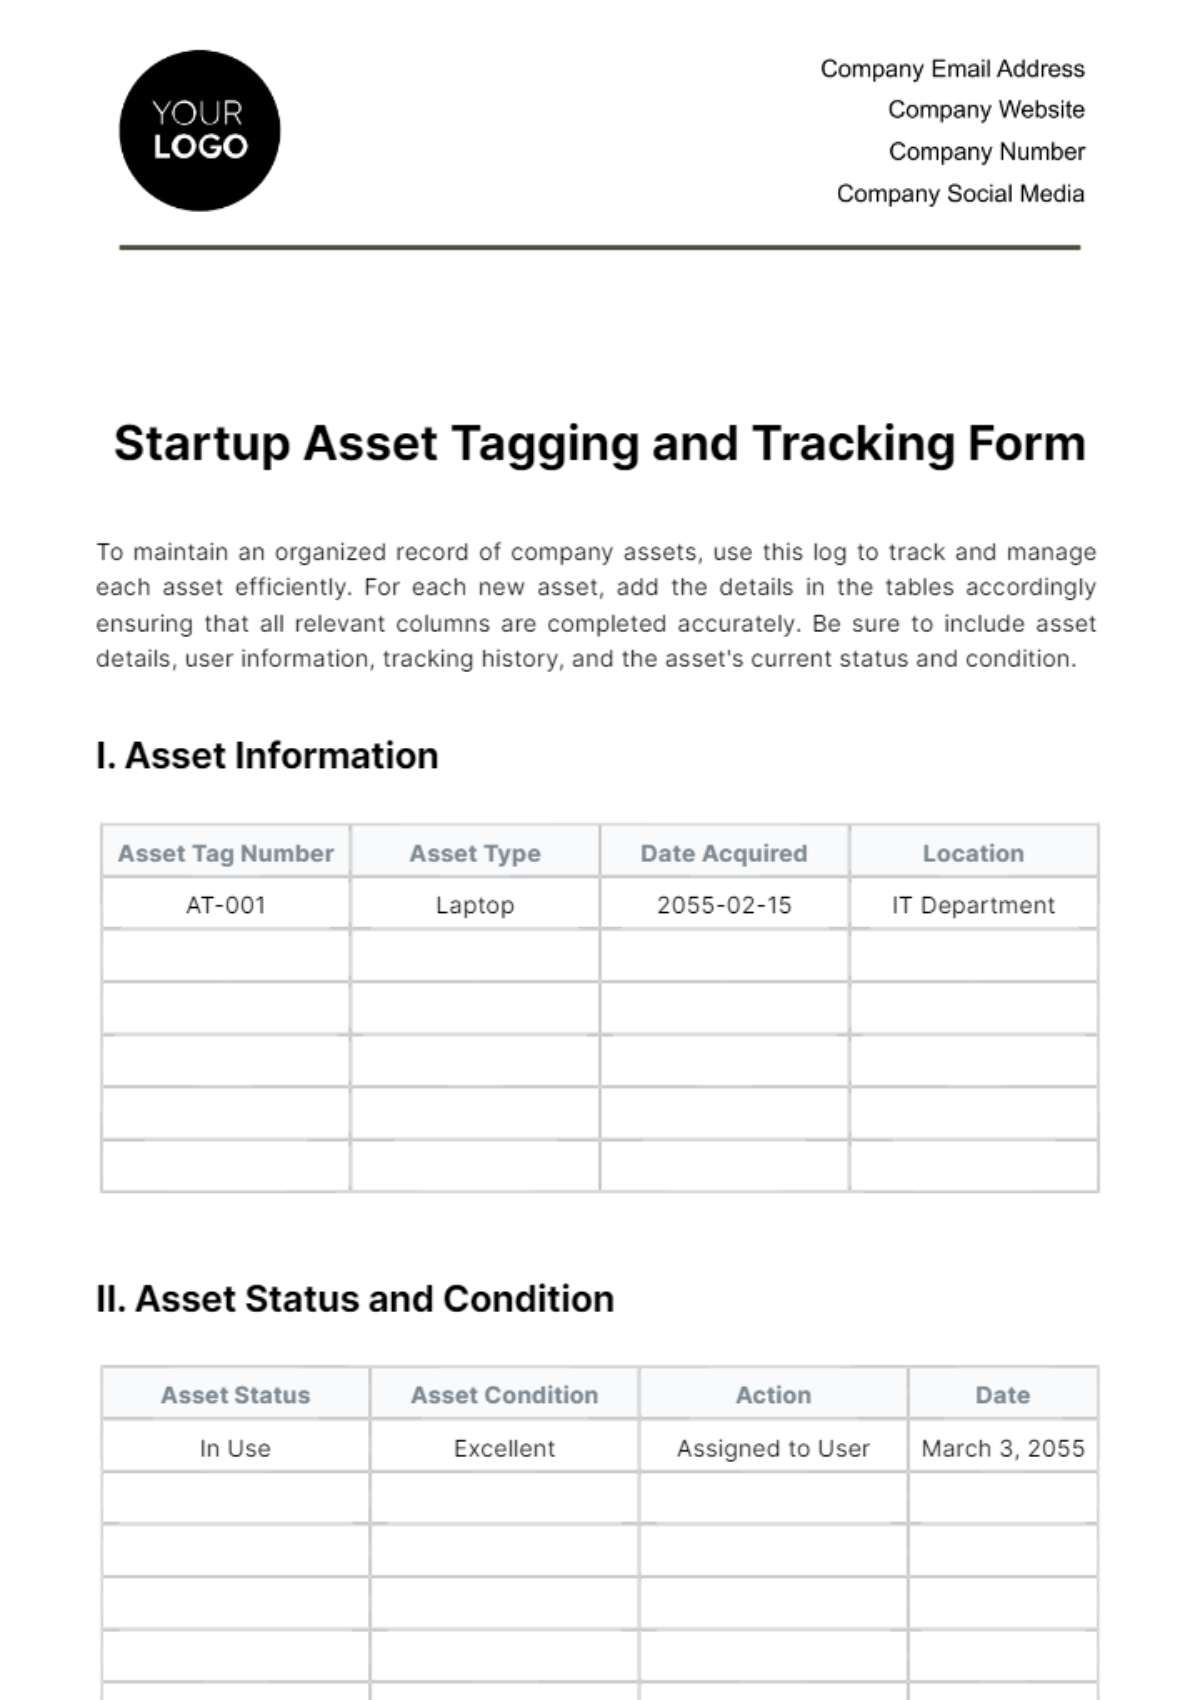 Startup Asset Tagging and Tracking Form Template